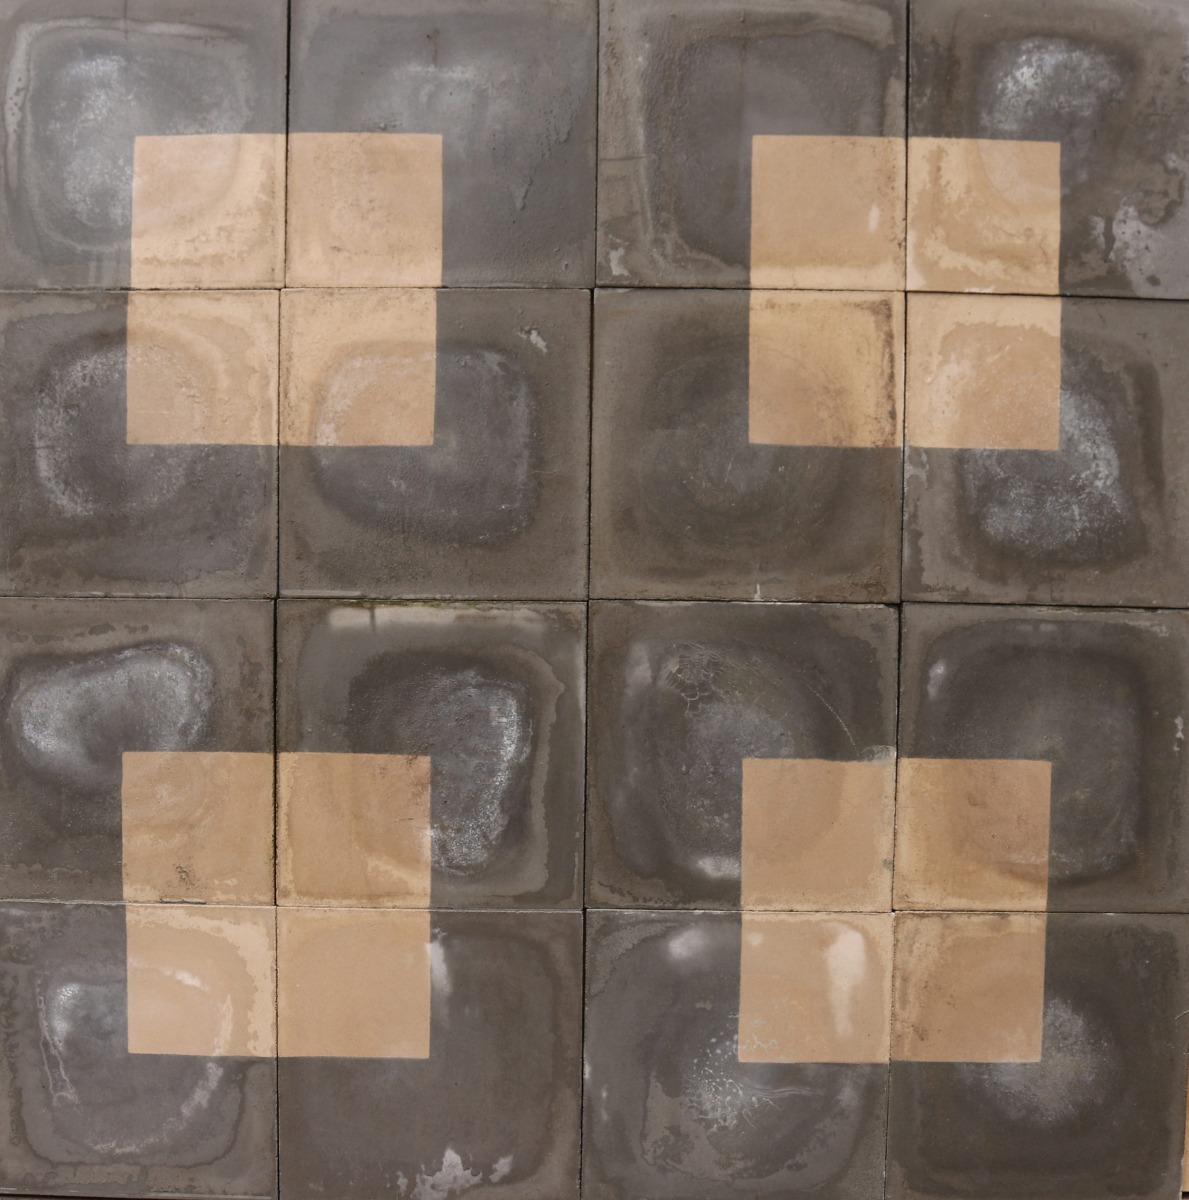 A batch of 57 reclaimed encaustic cement tiles with a black and white square pattern. These tiles will cover 2.2 m2 or 23 ft2. Suitable for wall or floors.